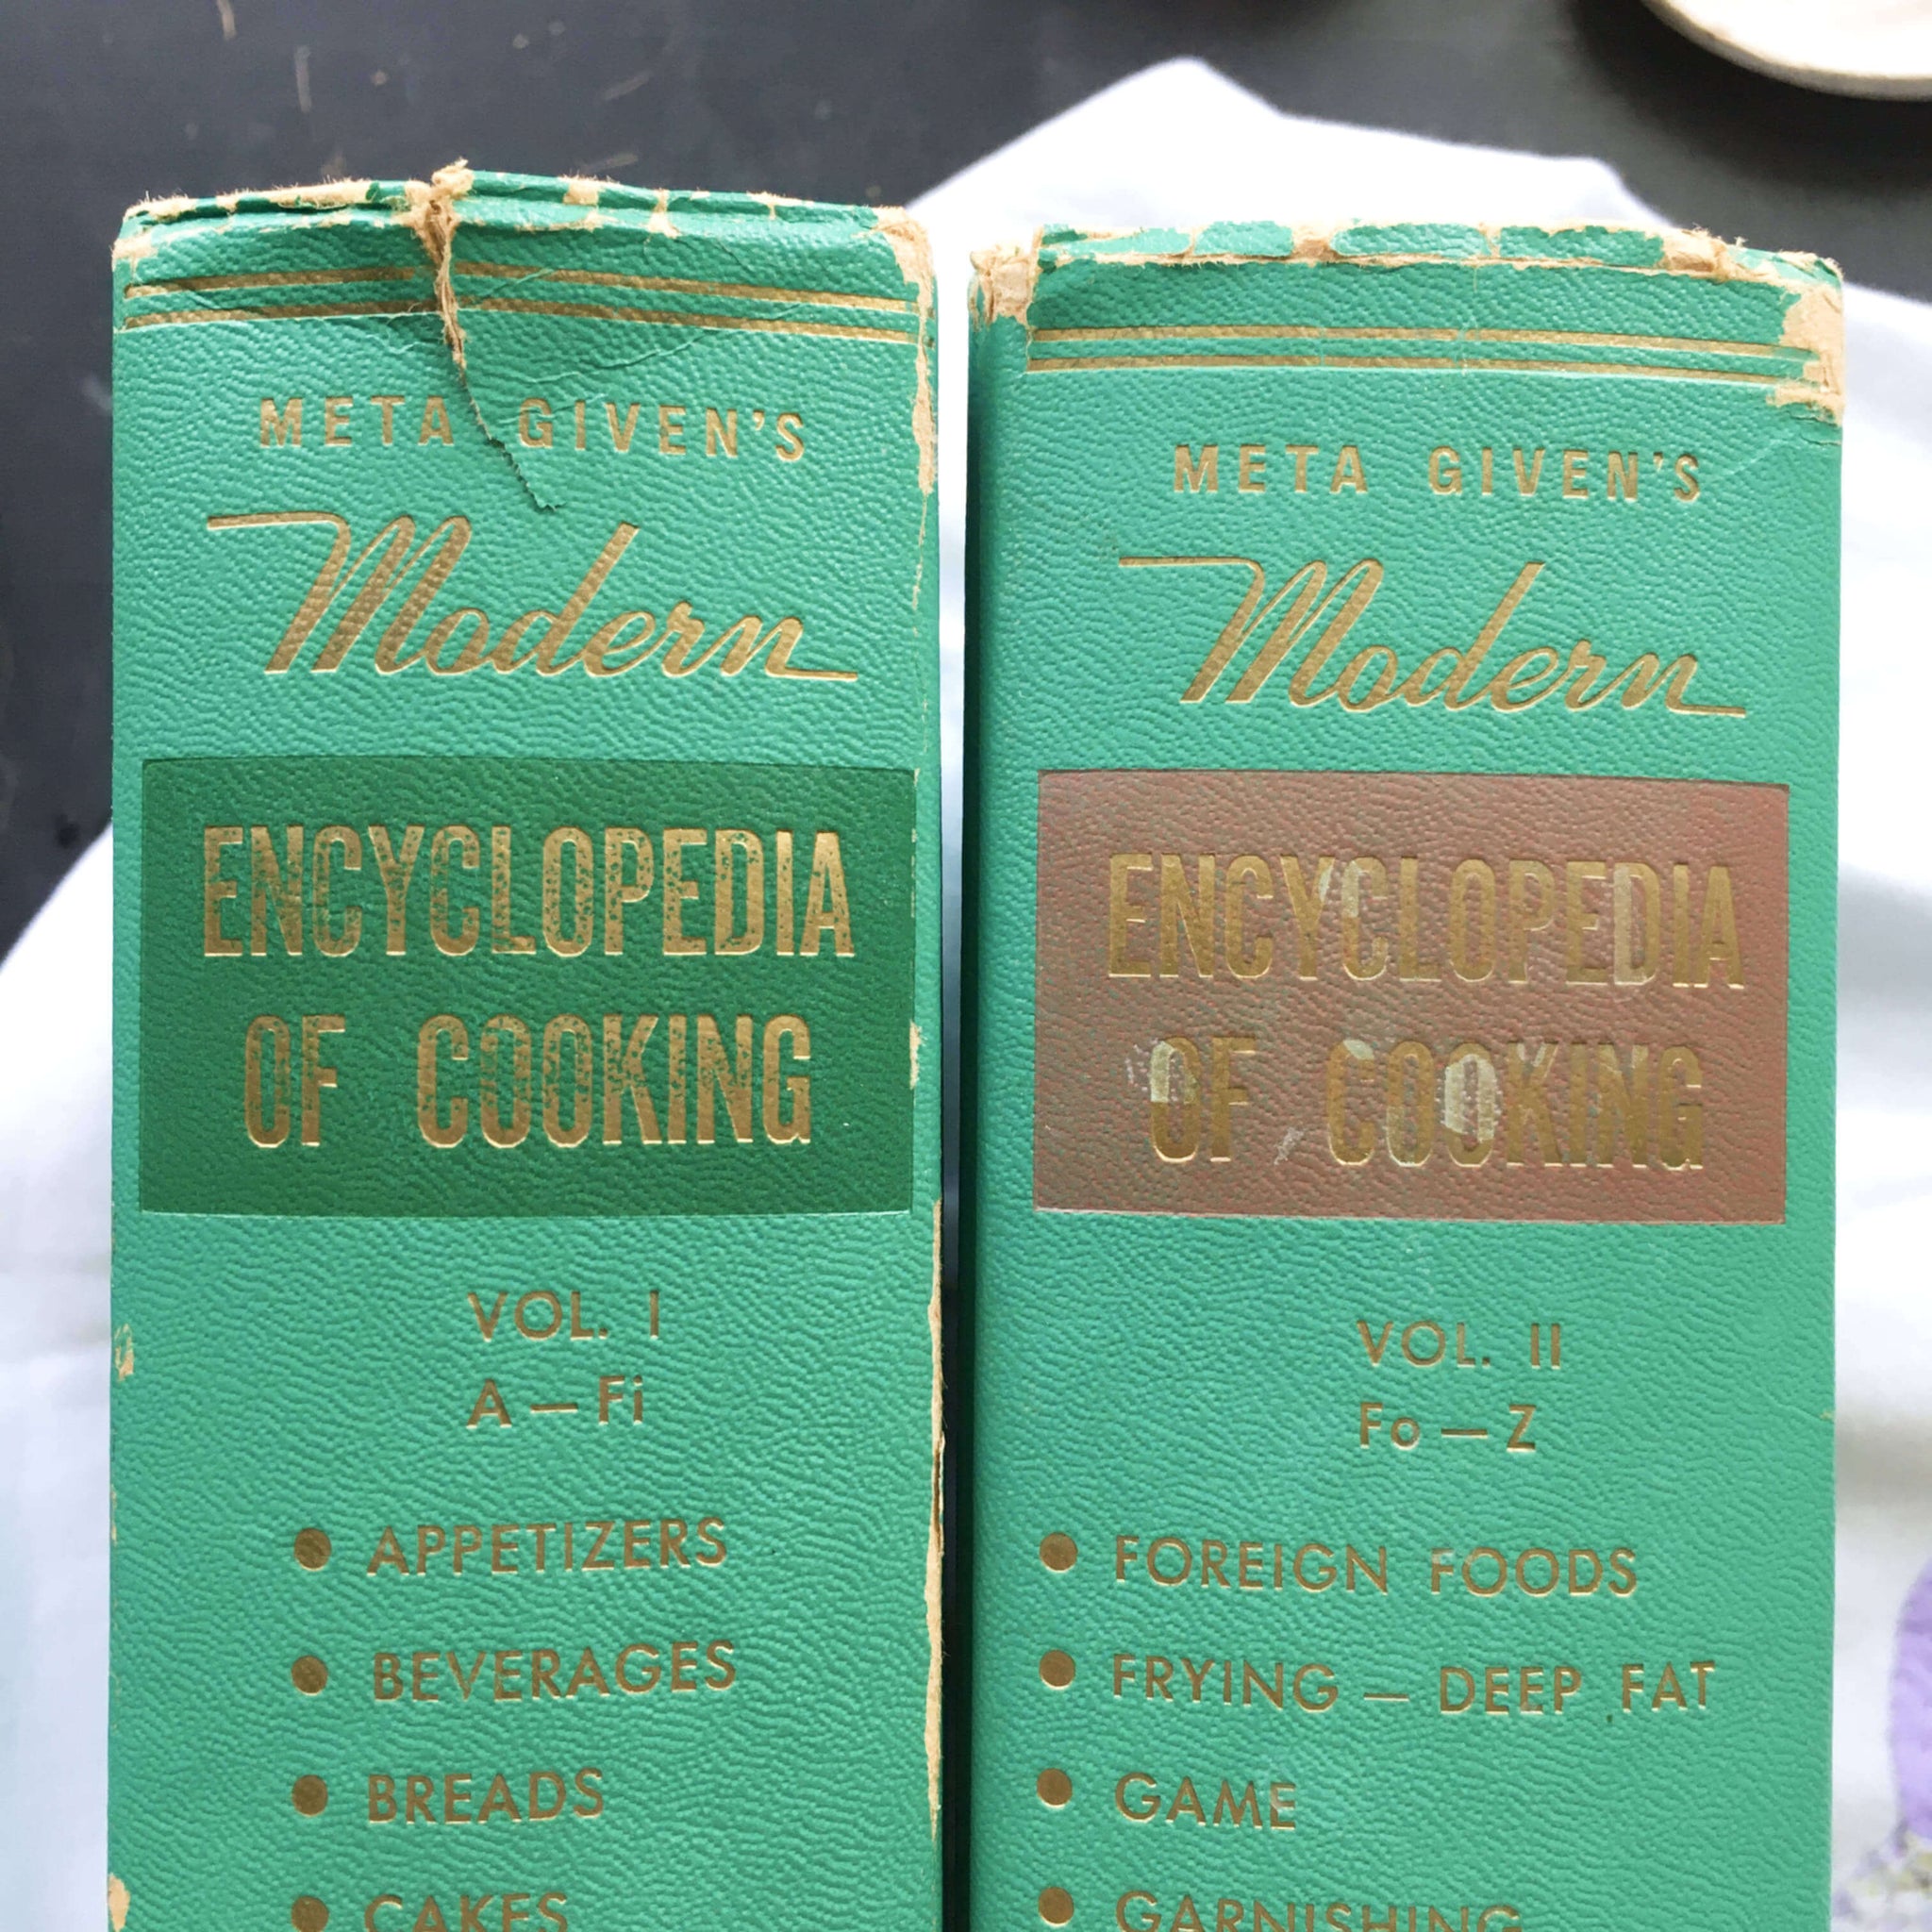 Meta Given's Modern Encyclopedia of Cooking - Volumes One and Two - 1959 Edition